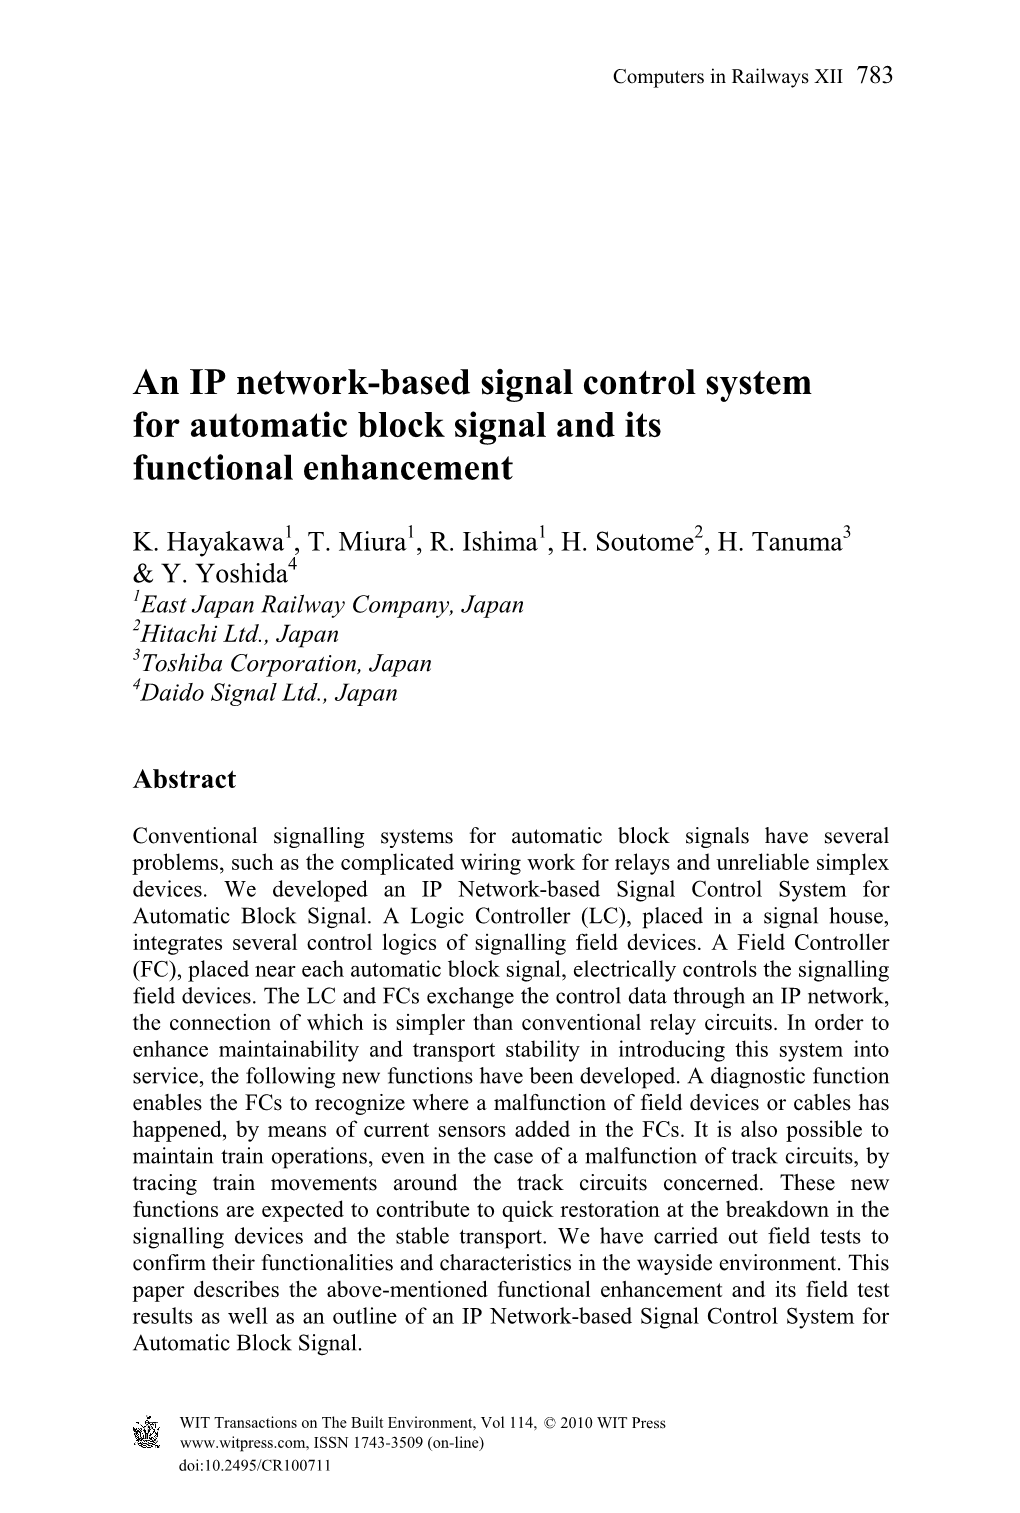 An IP Network-Based Signal Control System for Automatic Block Signal and Its Functional Enhancement